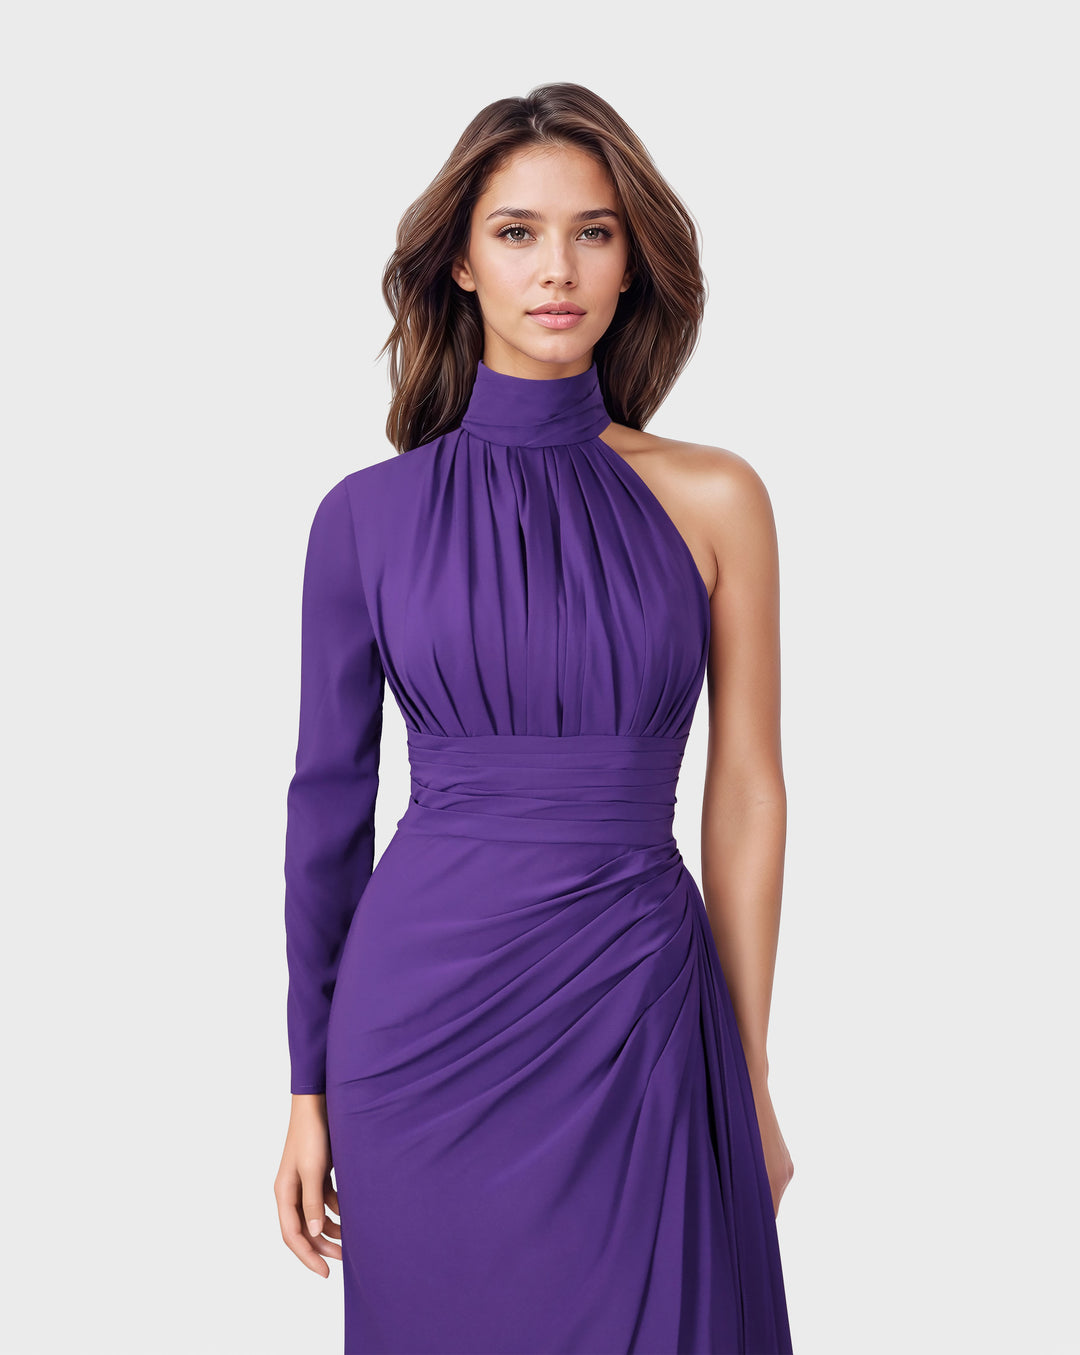 Draped shoulder off dress with side train